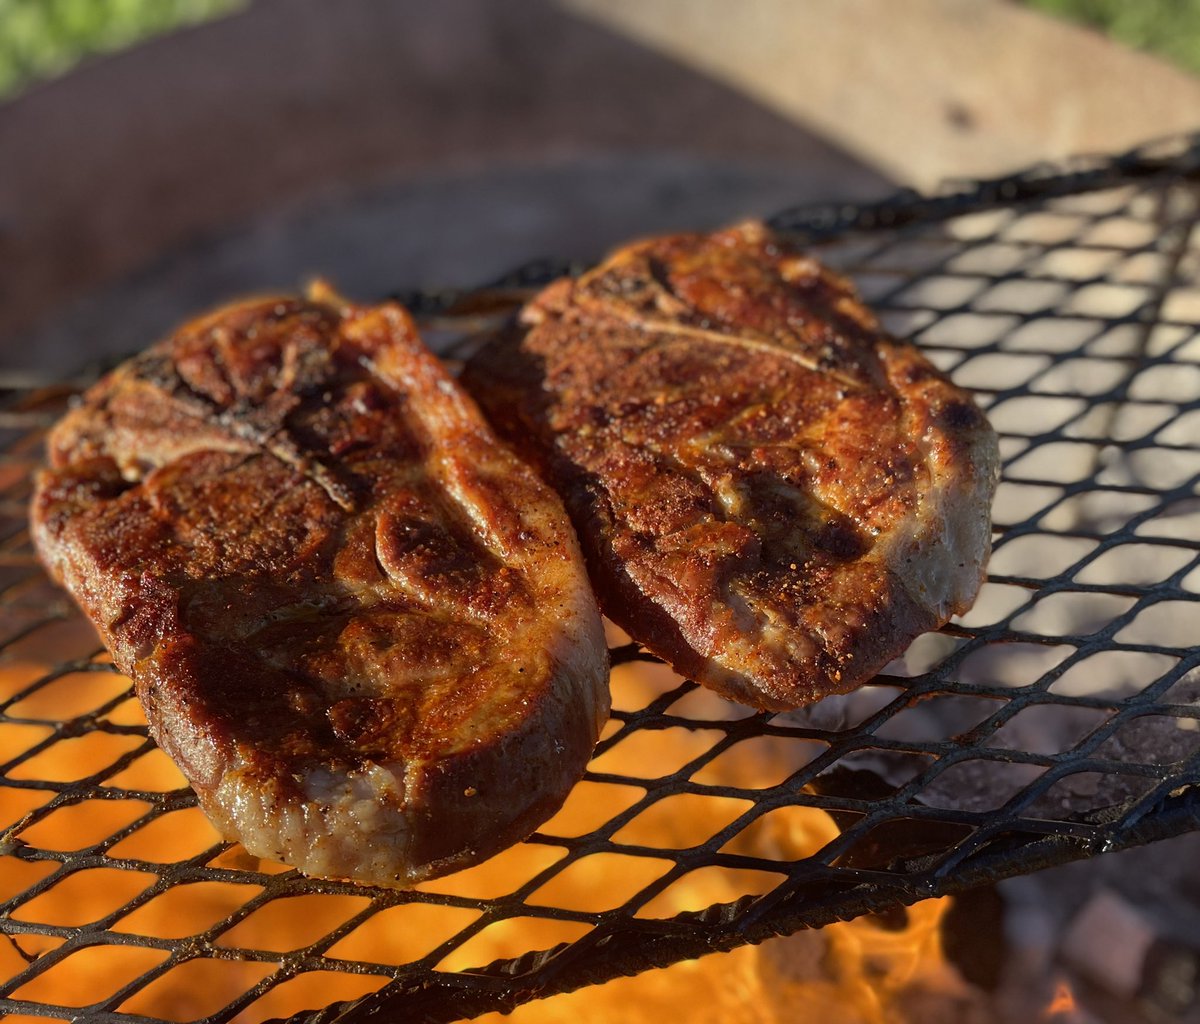 Thick cut pork steaks over the open fire!!

#nombrechutup #openfirecooking #livefirecooking